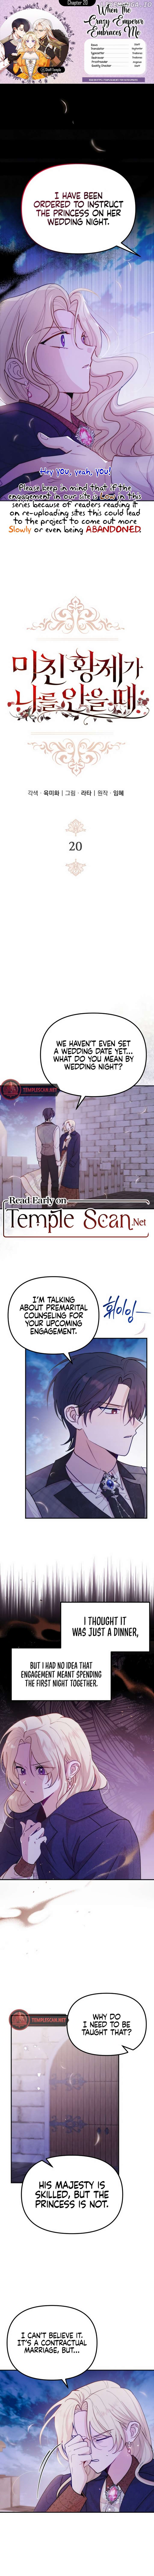 When The Crazy Emperor Embraces Me - chapter 20 - #1